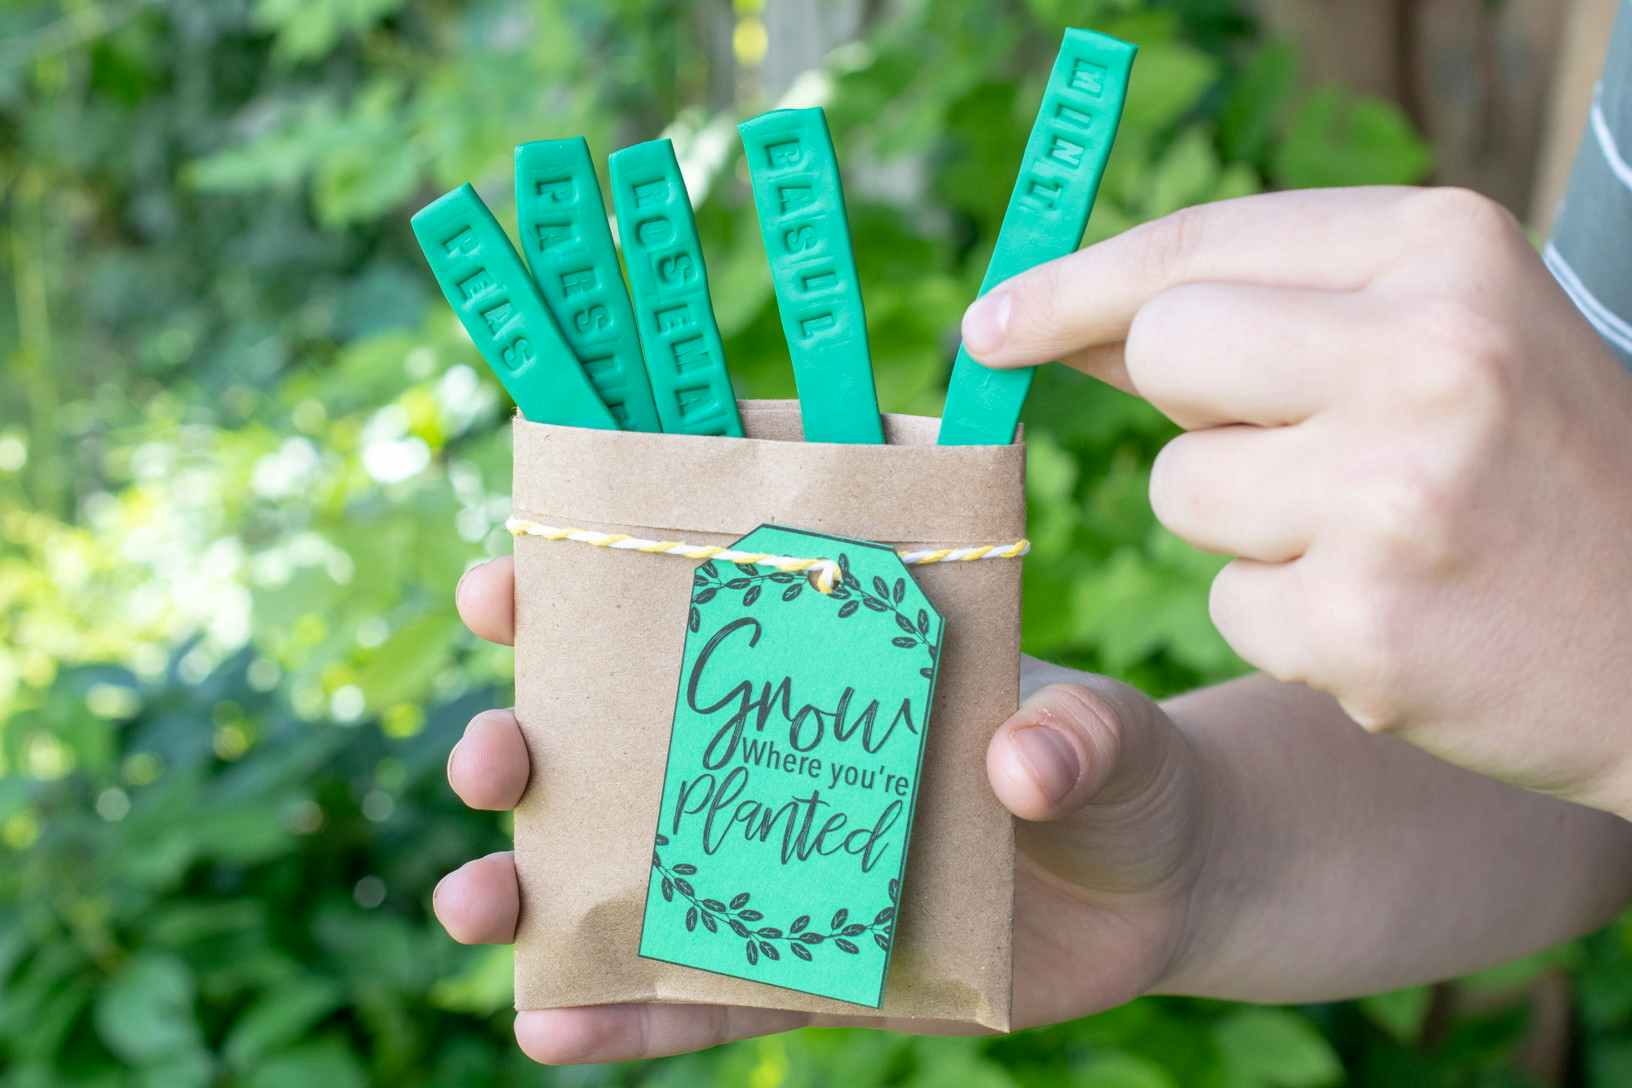 https://prod-cdn-thekrazycouponlady.imgix.net/wp-content/uploads/2018/07/05-1-diy-gifts-under-five-dollars-garden-markers-1530552875.jpg?auto=format&fit=fill&q=25